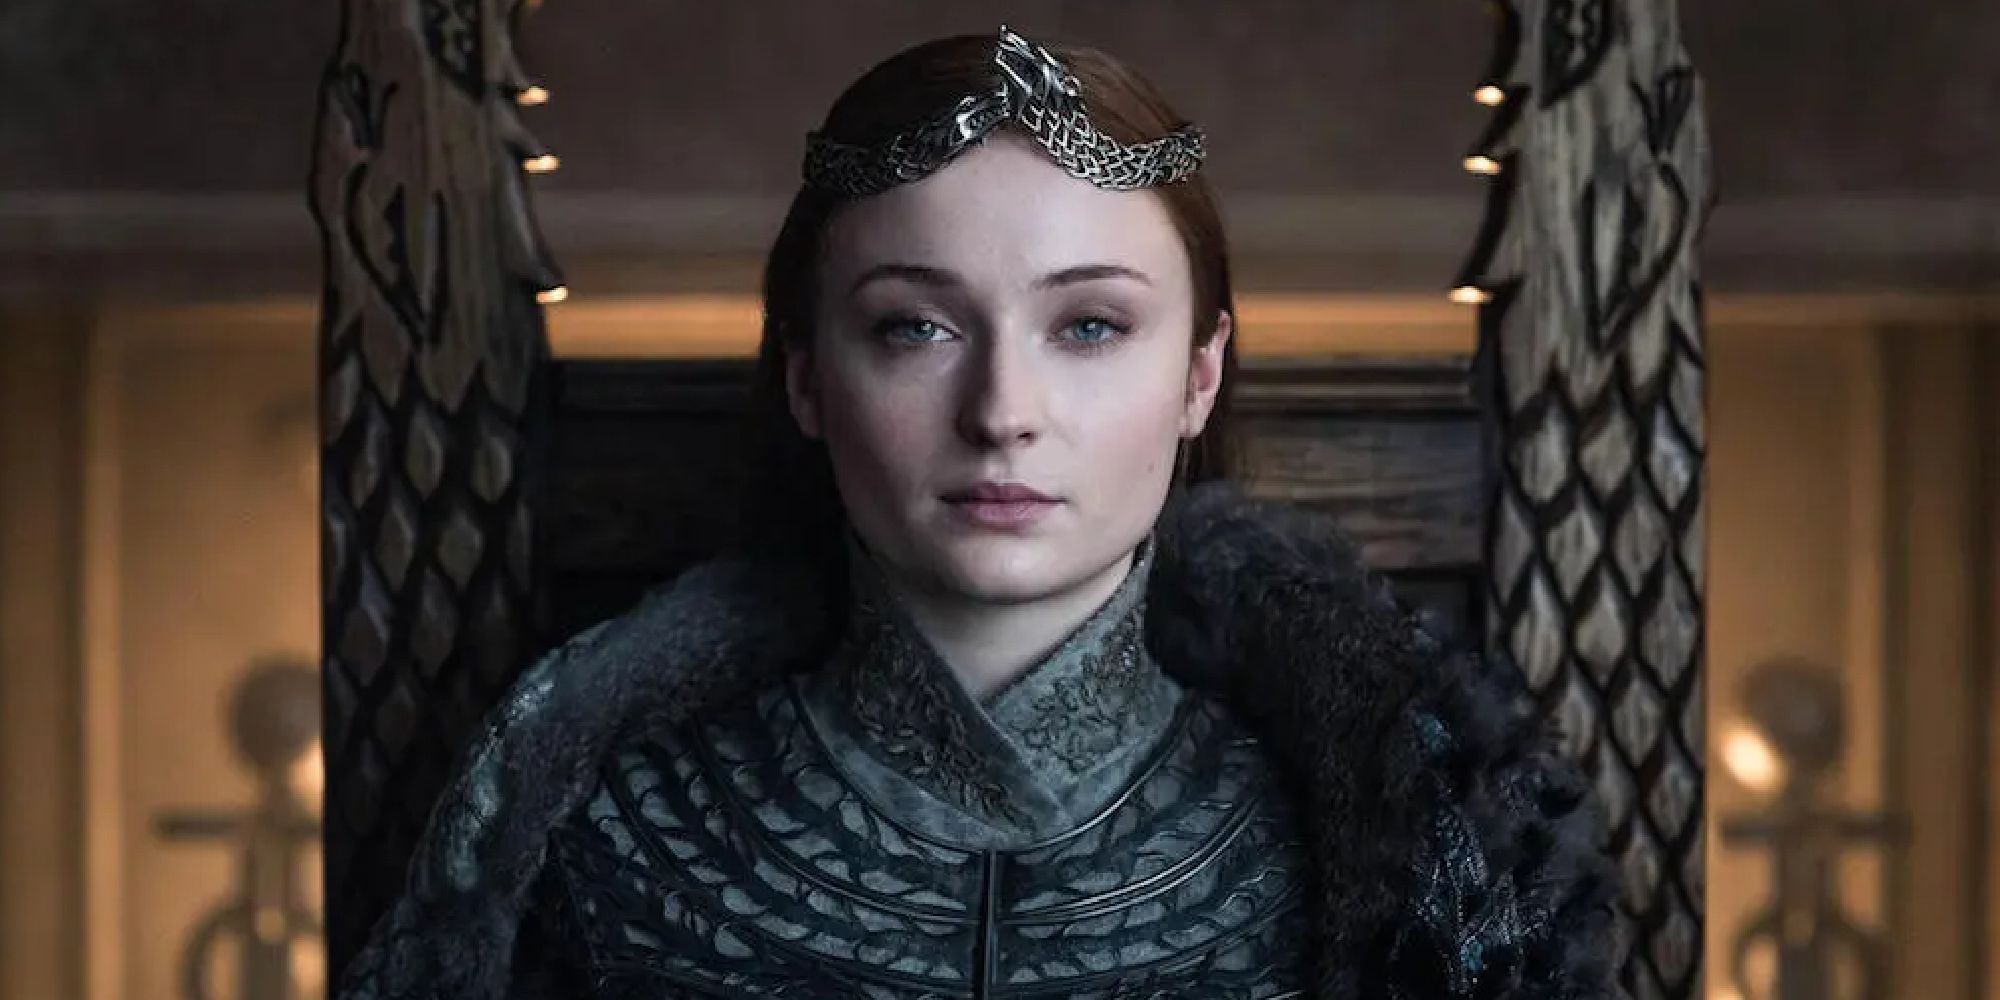 Sansa on the throne as Queen in the North in the season 8 finale